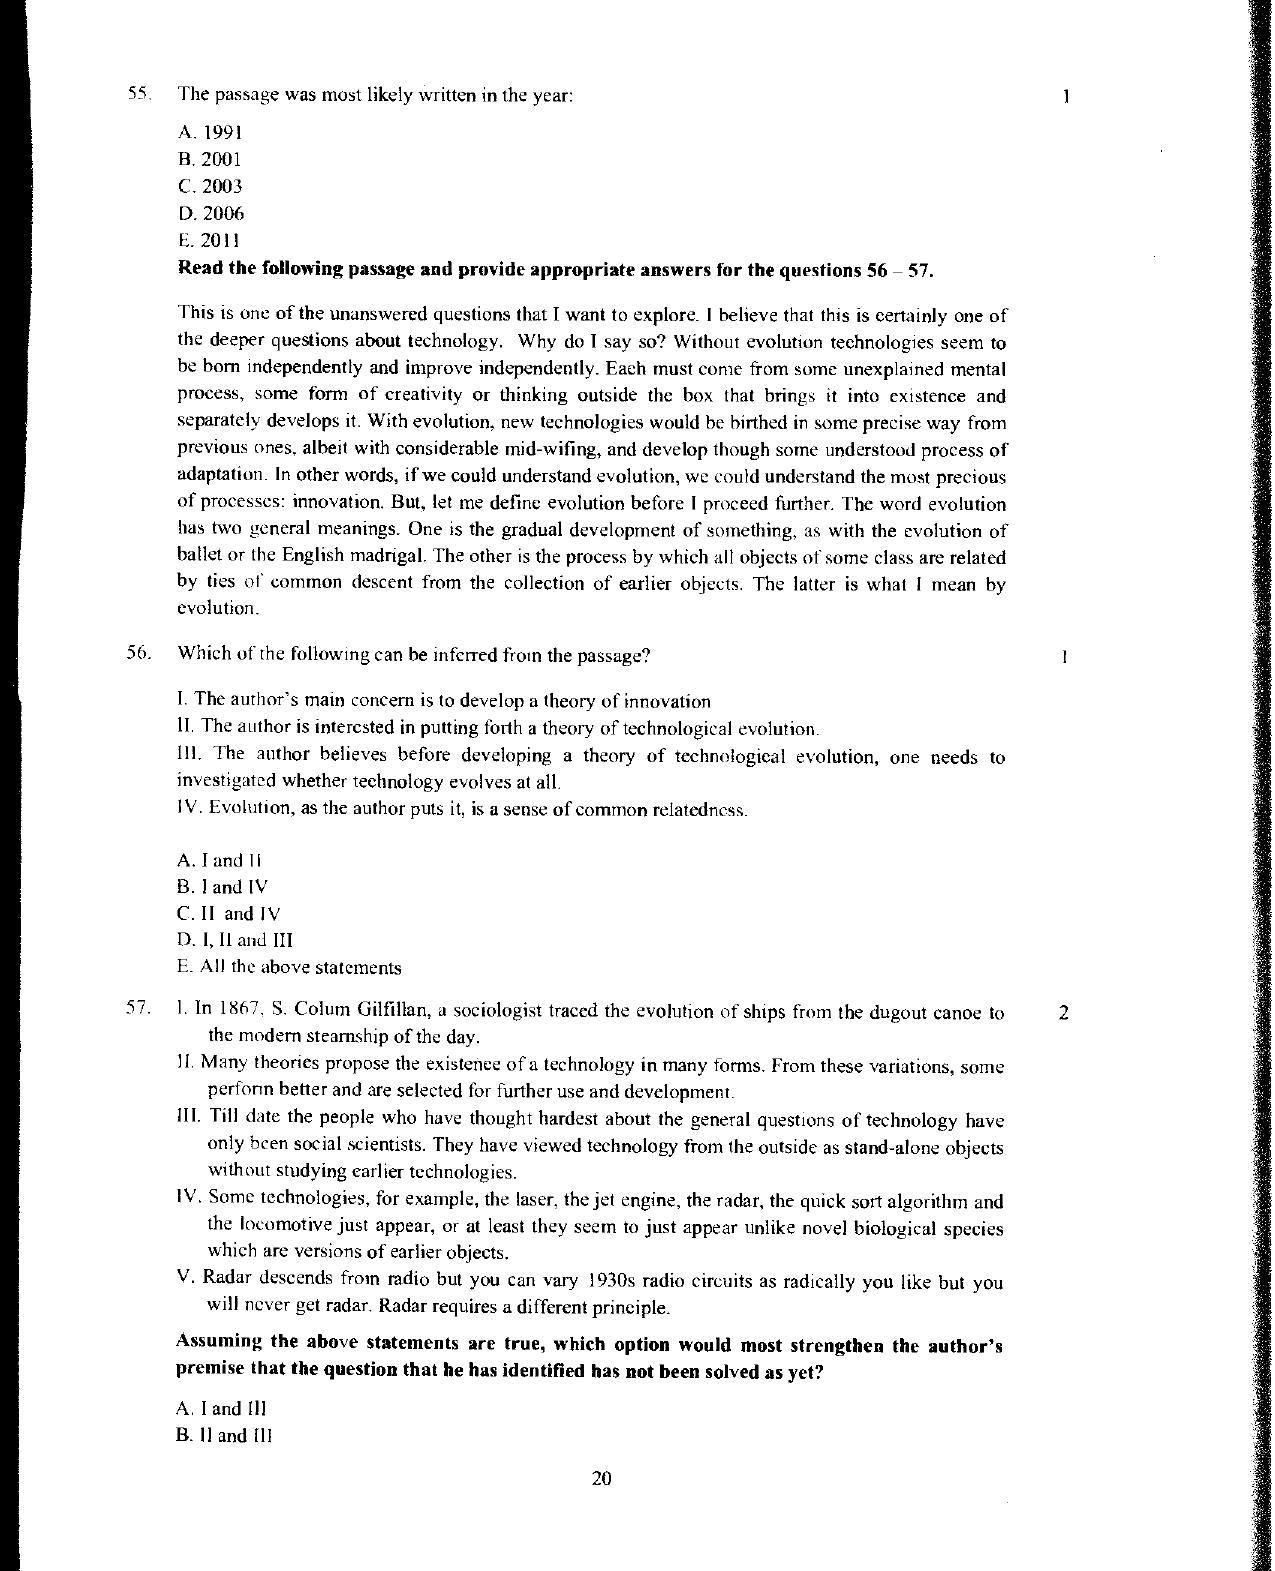 XAT 2012 Question Papers - Page 21